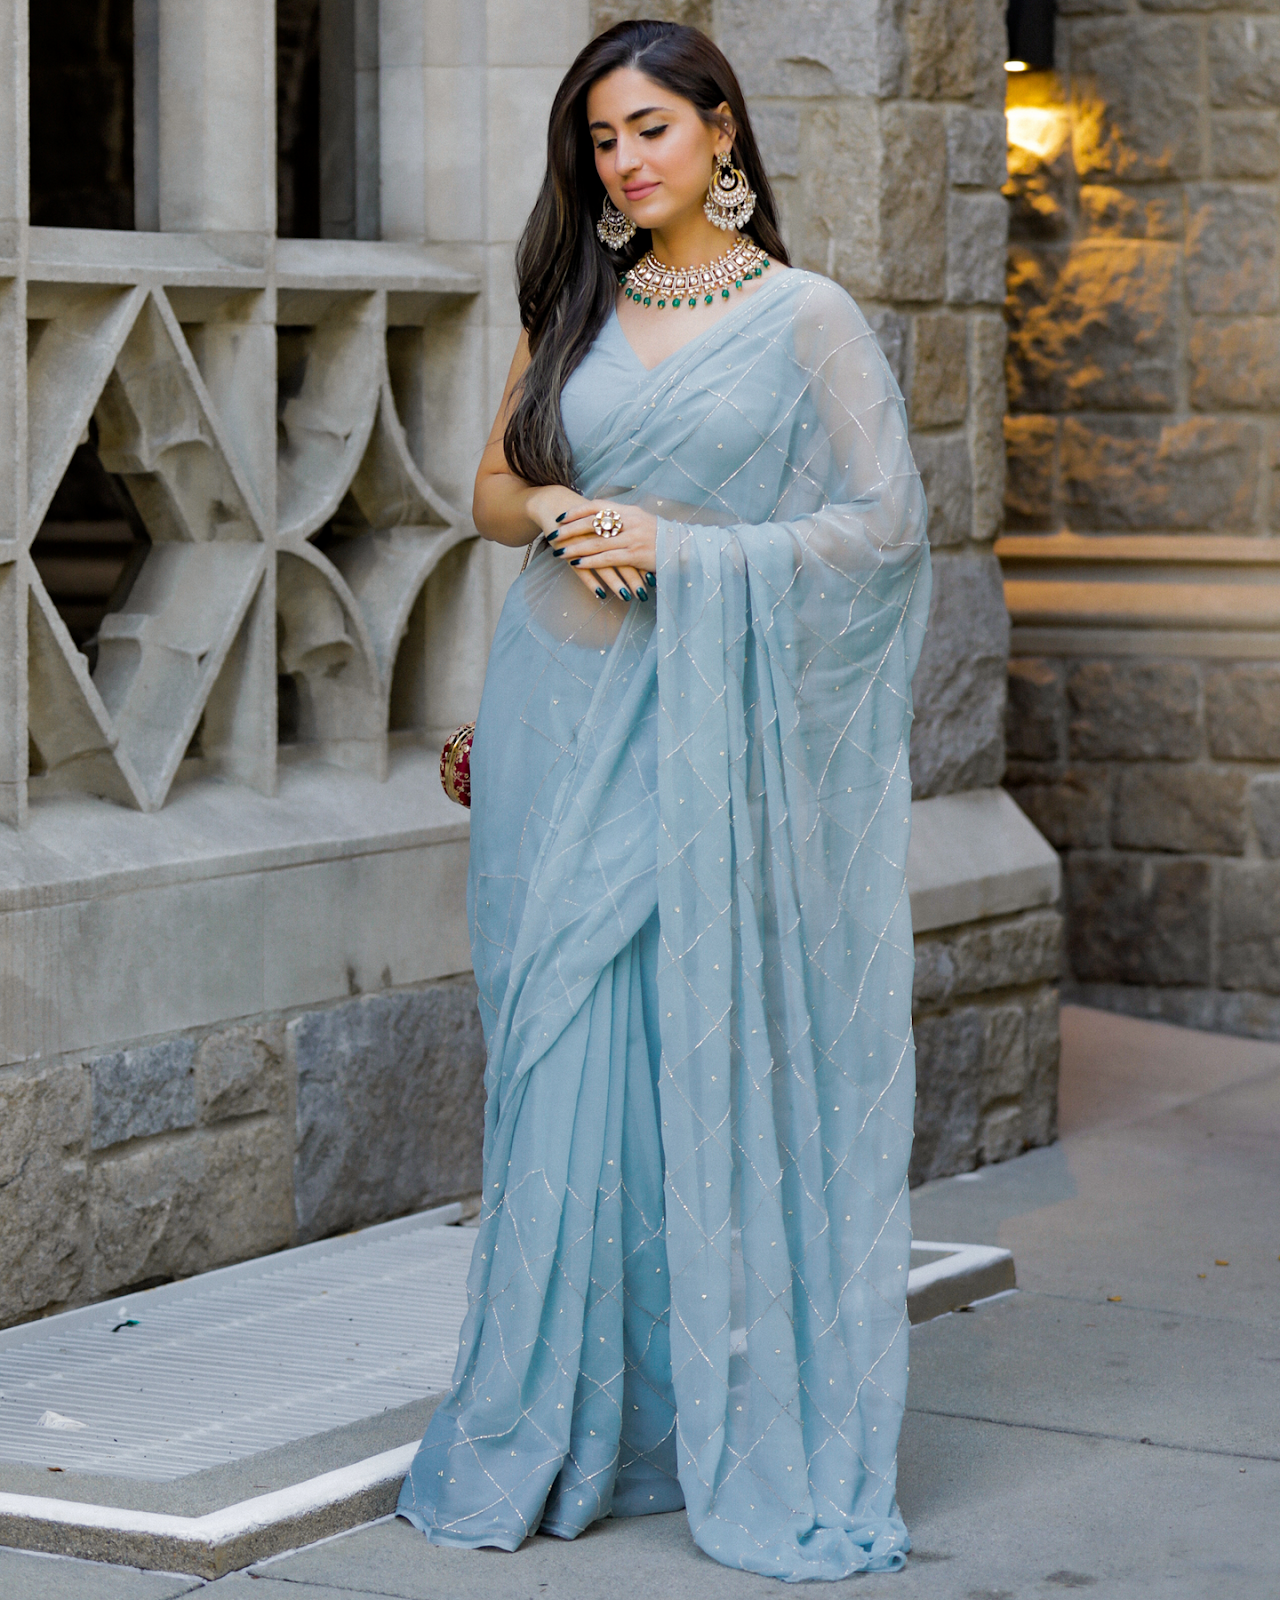 The Timeless Elegance of Sarees: A Must-Have for Every Woman, by Virat